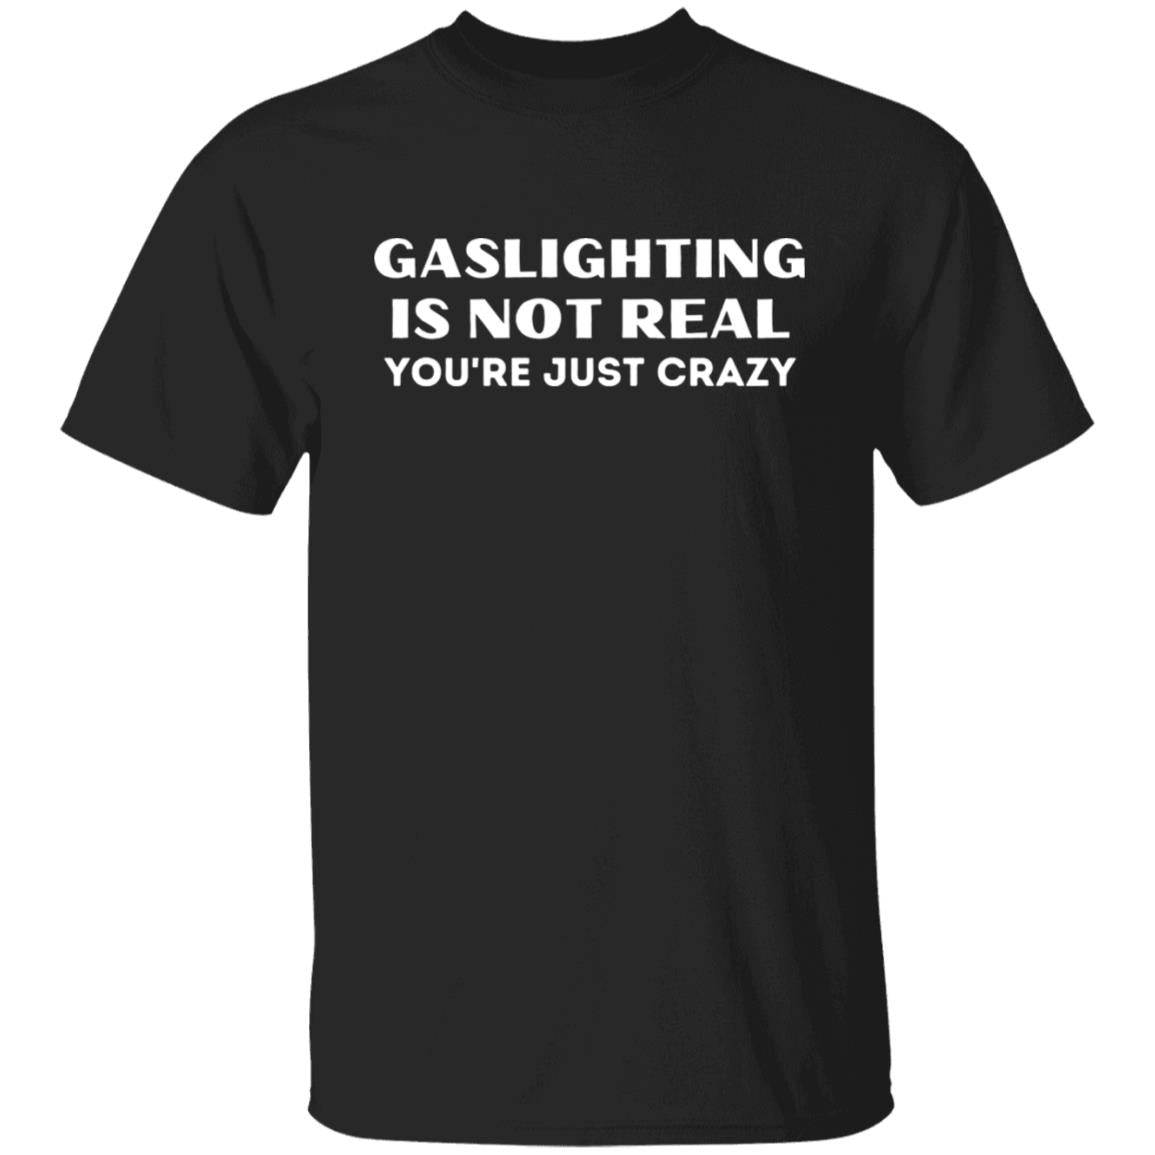 Gaslighting Is Not Real, You're Just Crazy Sarcastic Humor T shirt